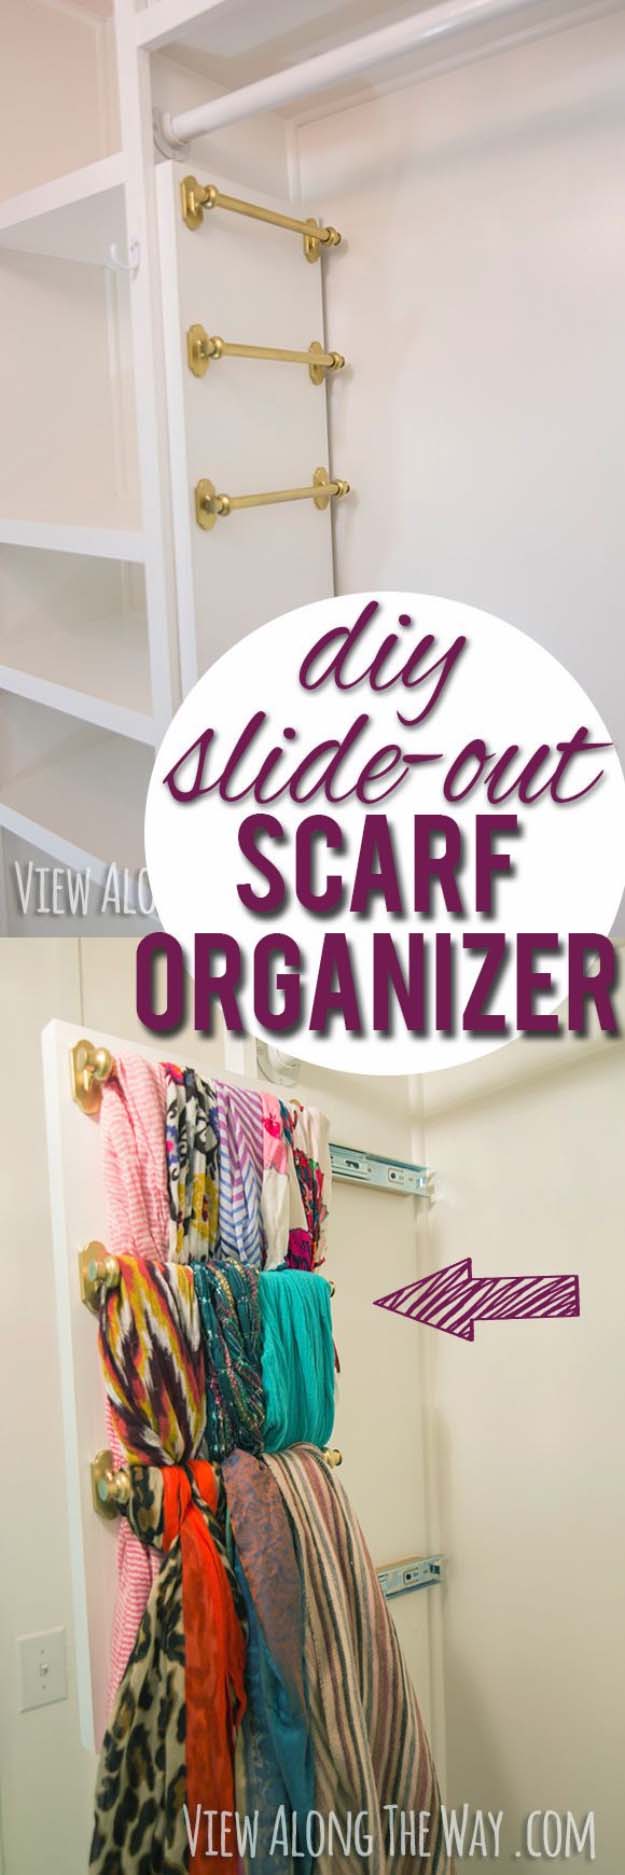 15 Smart Ways To Organize Your Closet With Practical Ideas